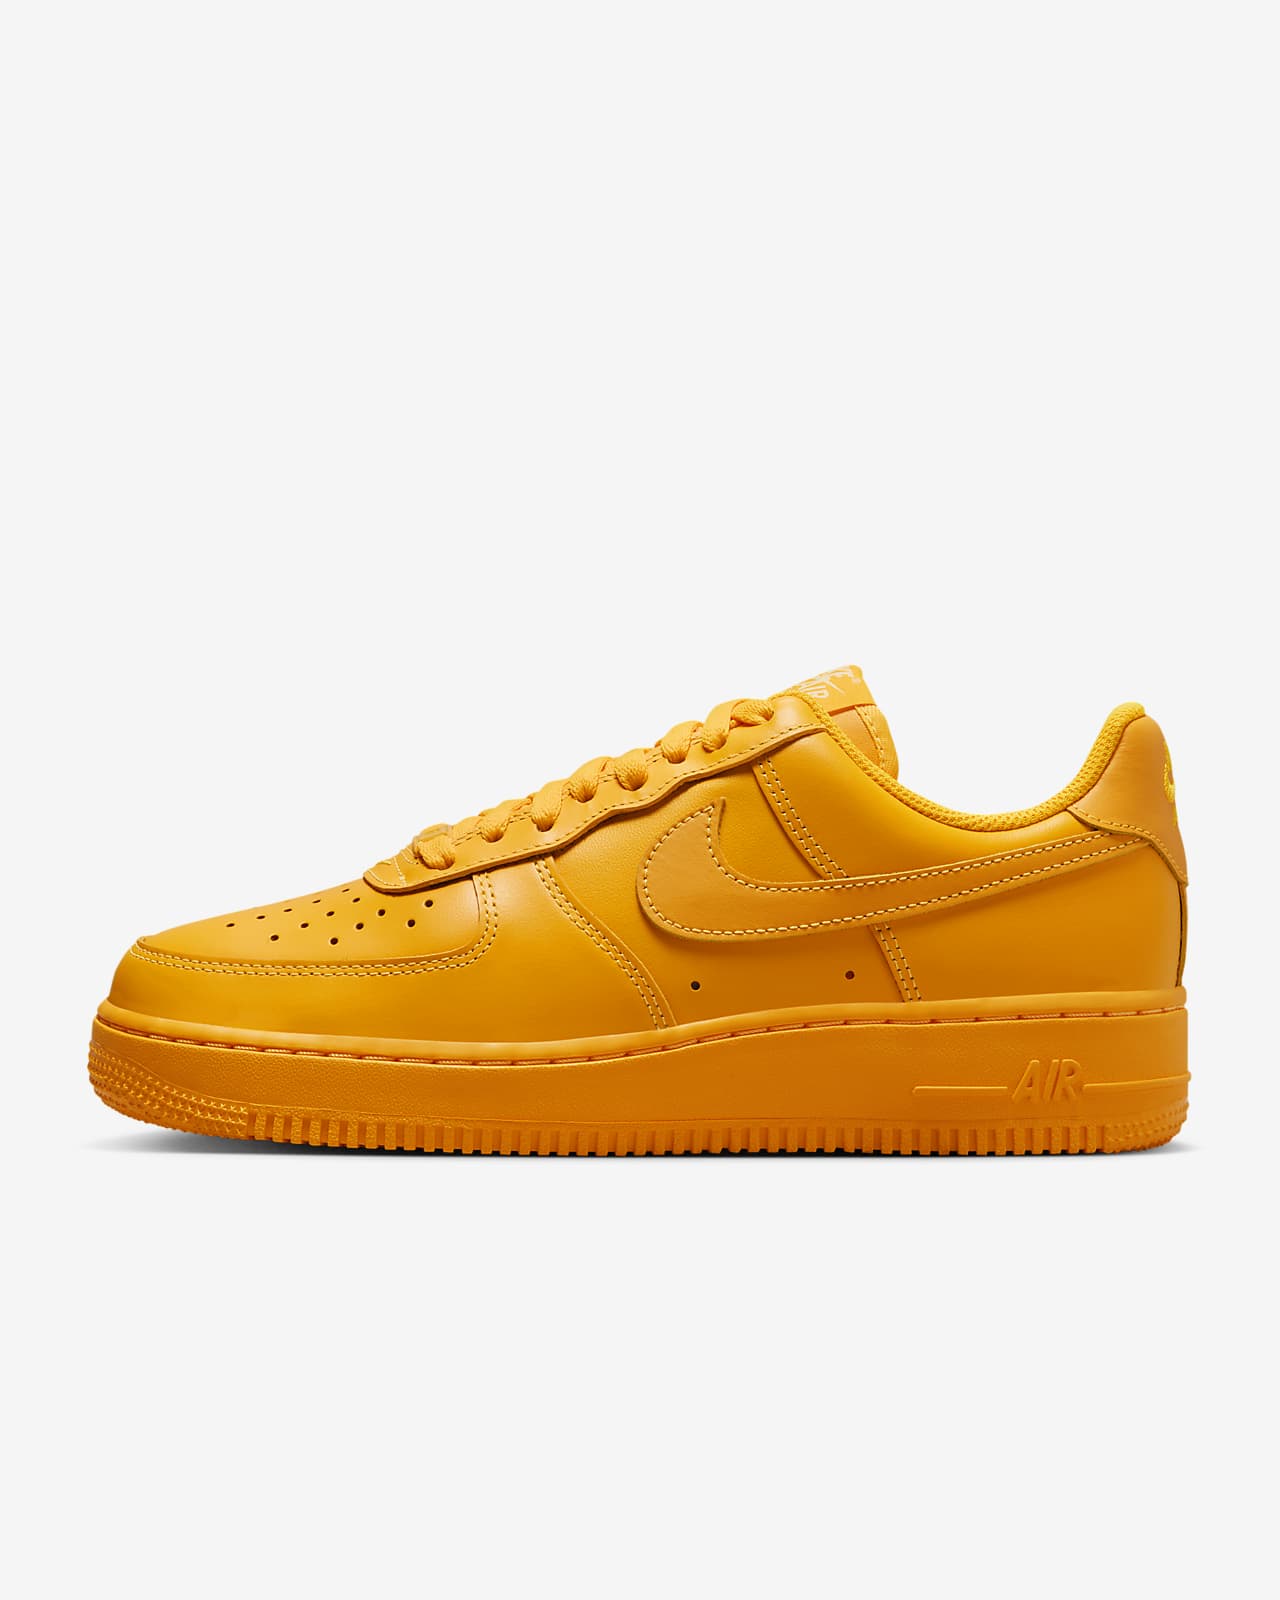 Nike Air Force 1 '07 Women's Shoes